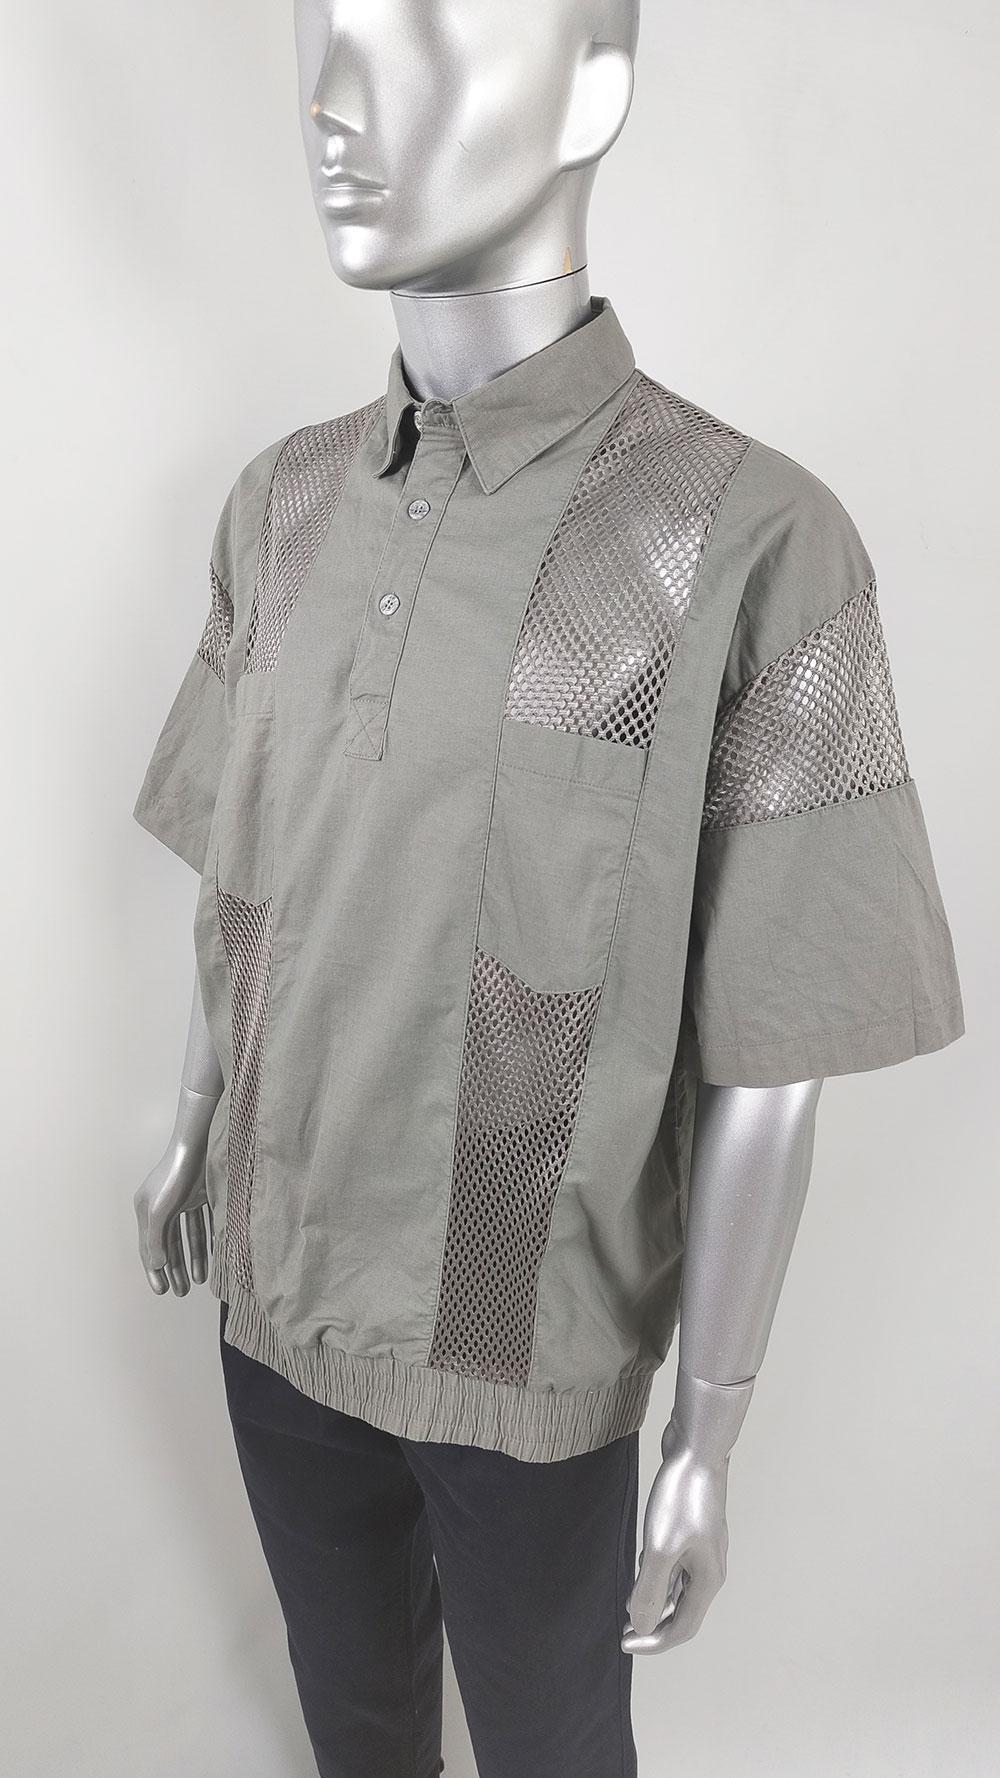 Vintage Mens See Through Mens Mesh Panel Short Sleeve Shirt, 1980s In Good Condition For Sale In Doncaster, South Yorkshire